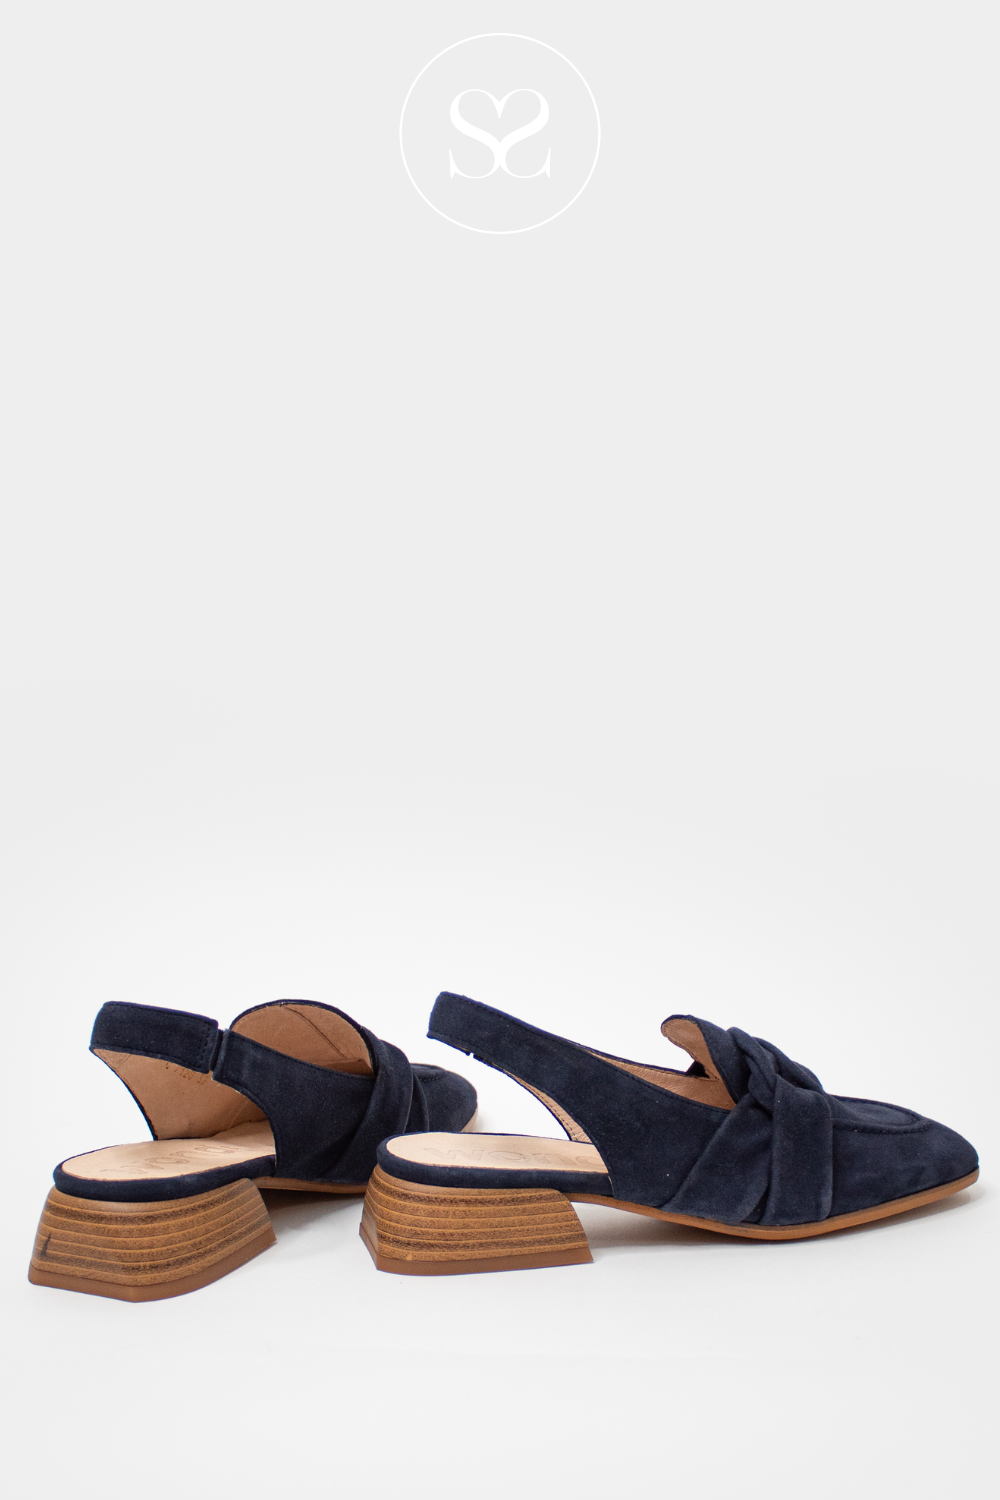 WONDERS C-7120 NAVY SUEDE SLINGBACK LOAFERS WITH BOW DETAIL